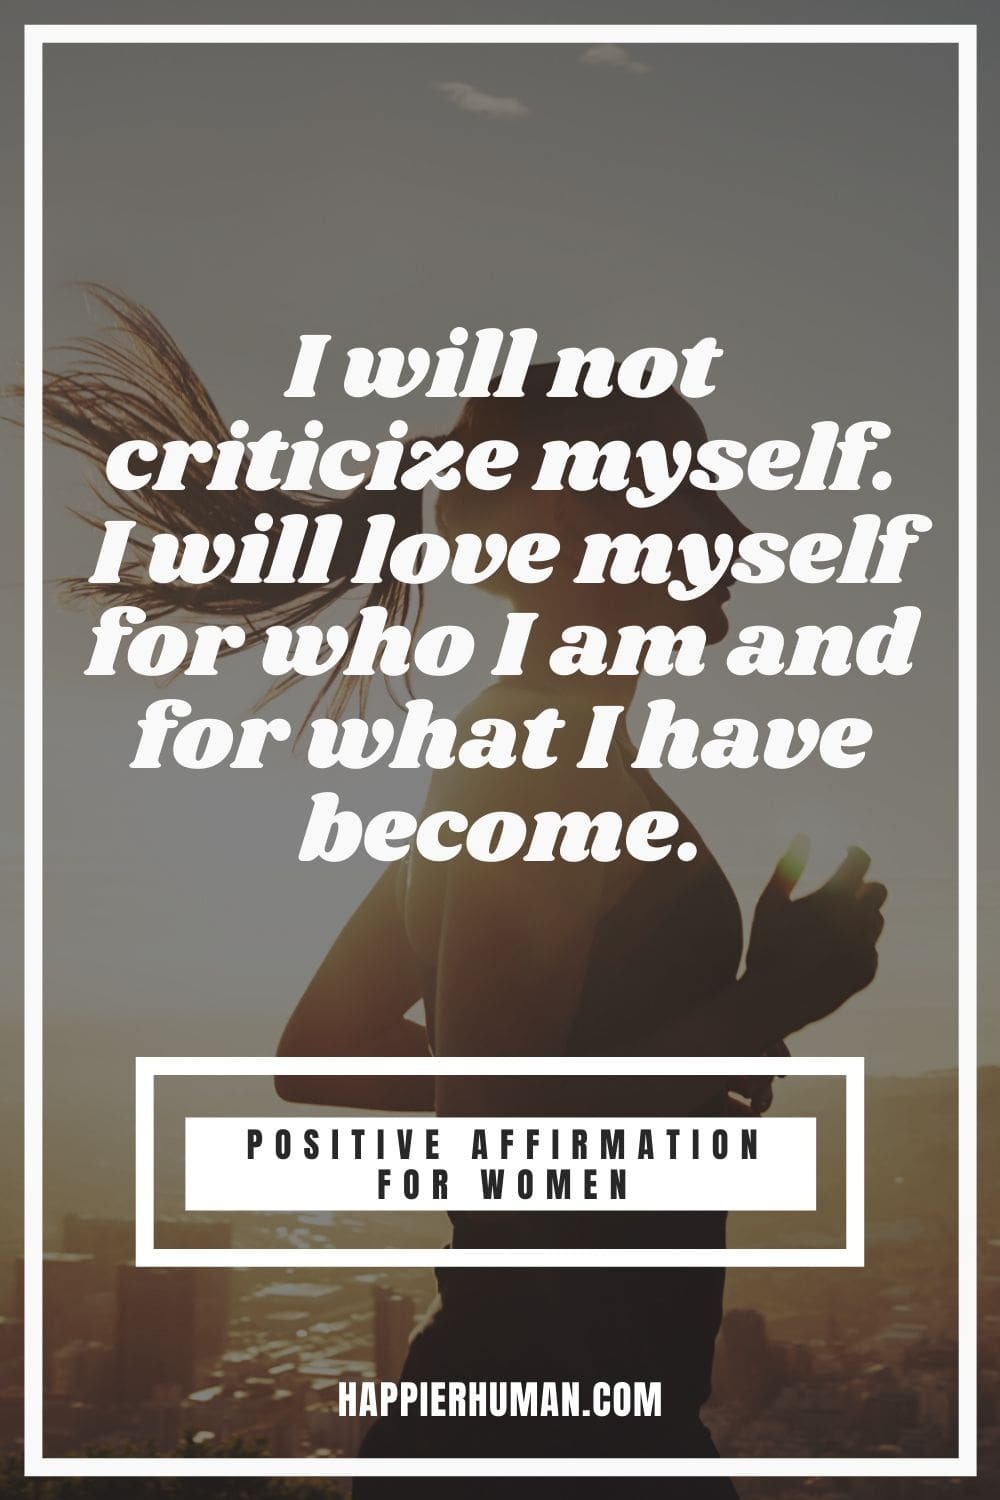 Positive Affirmations for Women - I will not criticize myself. I will love myself for who I am and for what I have become. | high value woman affirmations | positive affirmations for success | positive daily affirmations #affirmations #affirmationsoftheday #affirmationswork